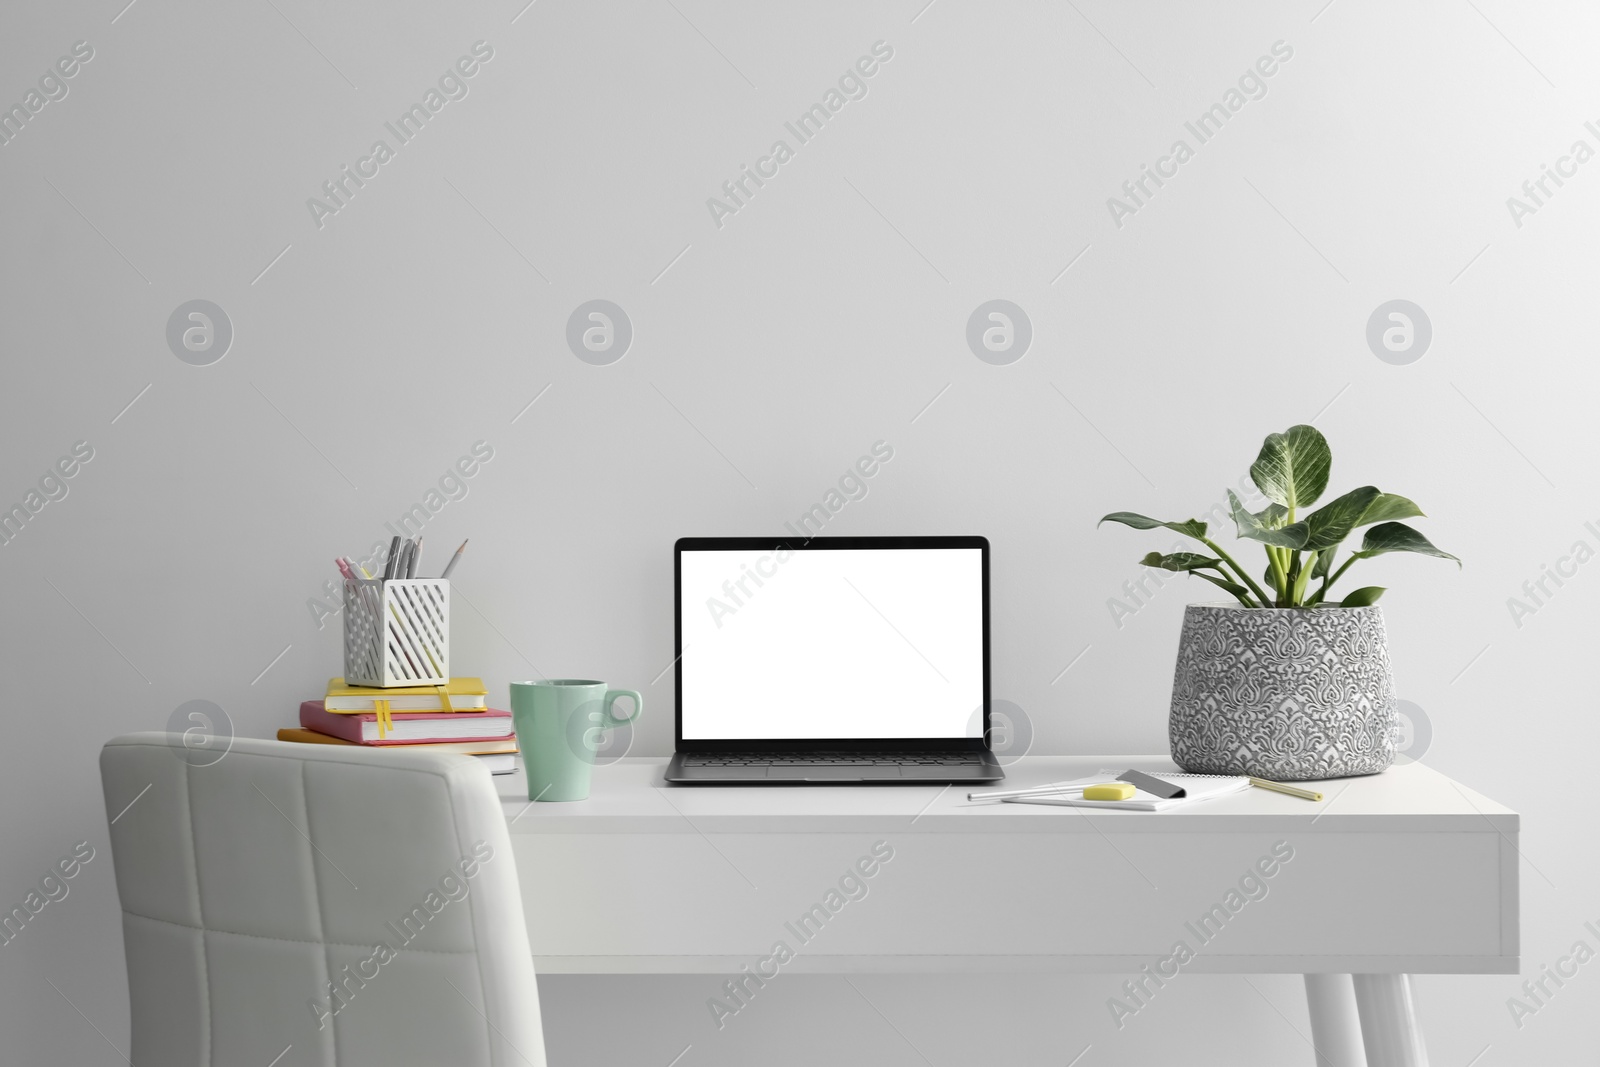 Photo of Stylish workplace with laptop, houseplant, stationary and cup on table near white wall